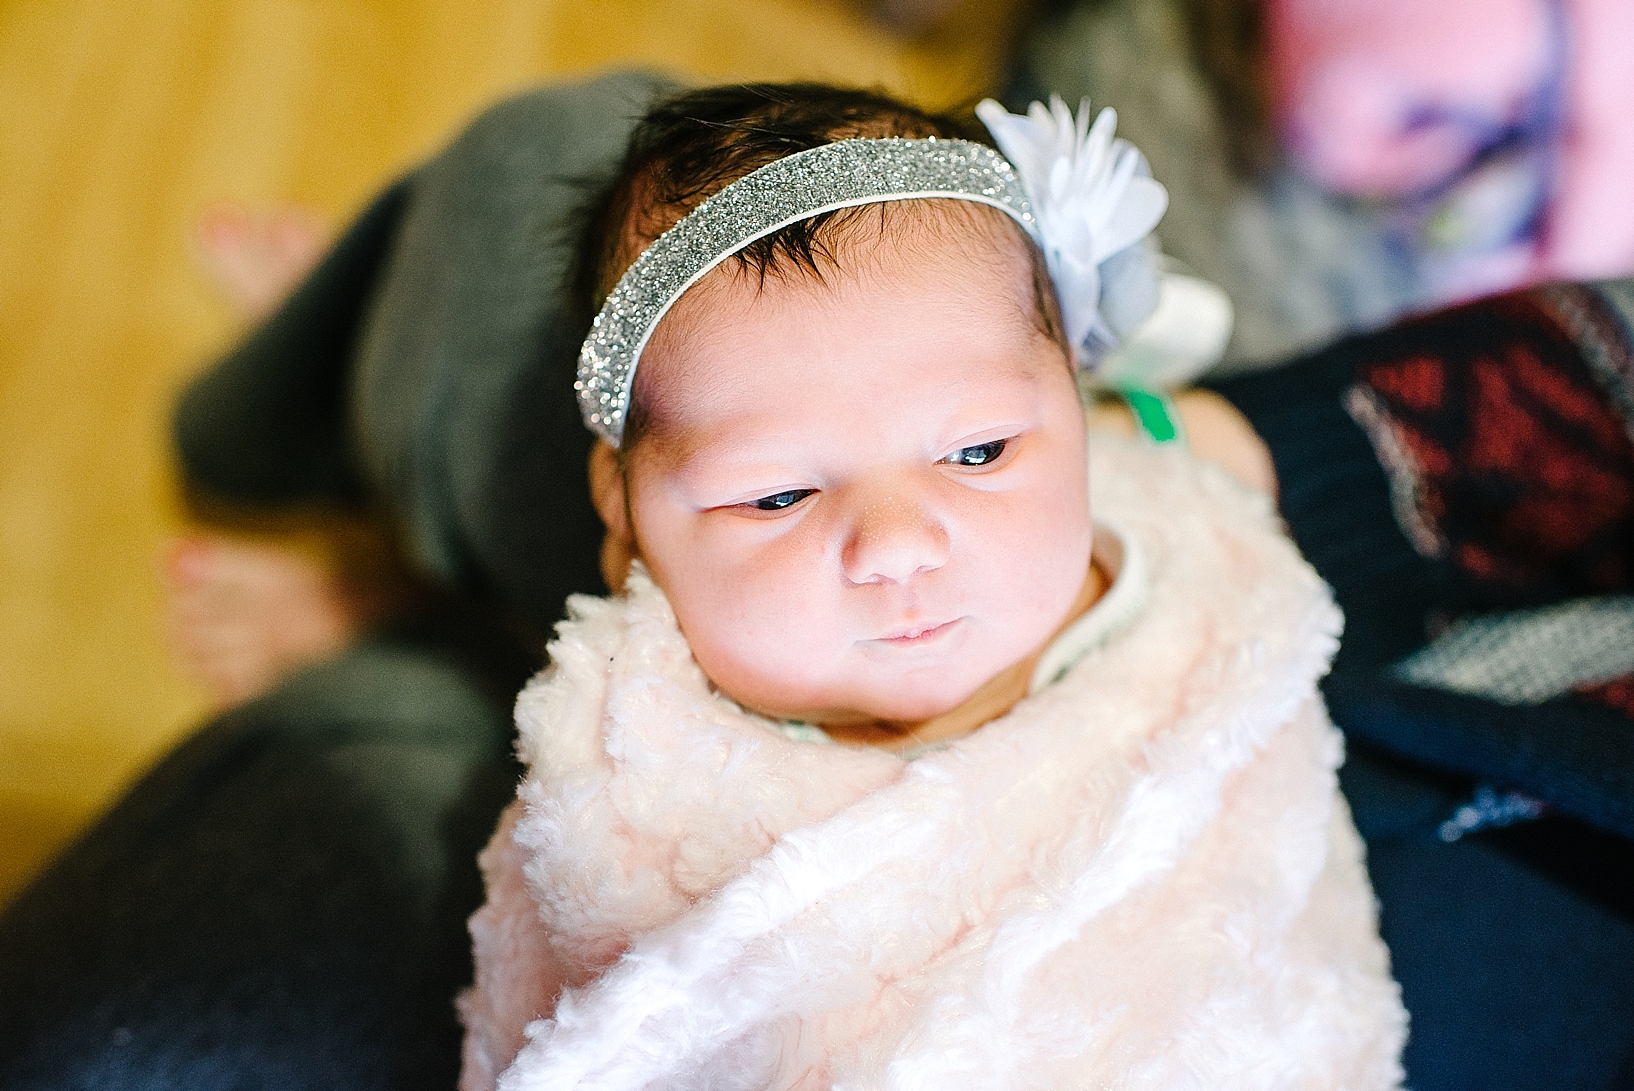 newborn baby girl wrapped in pink fuzzy blanket with glittery headband on and dark hair